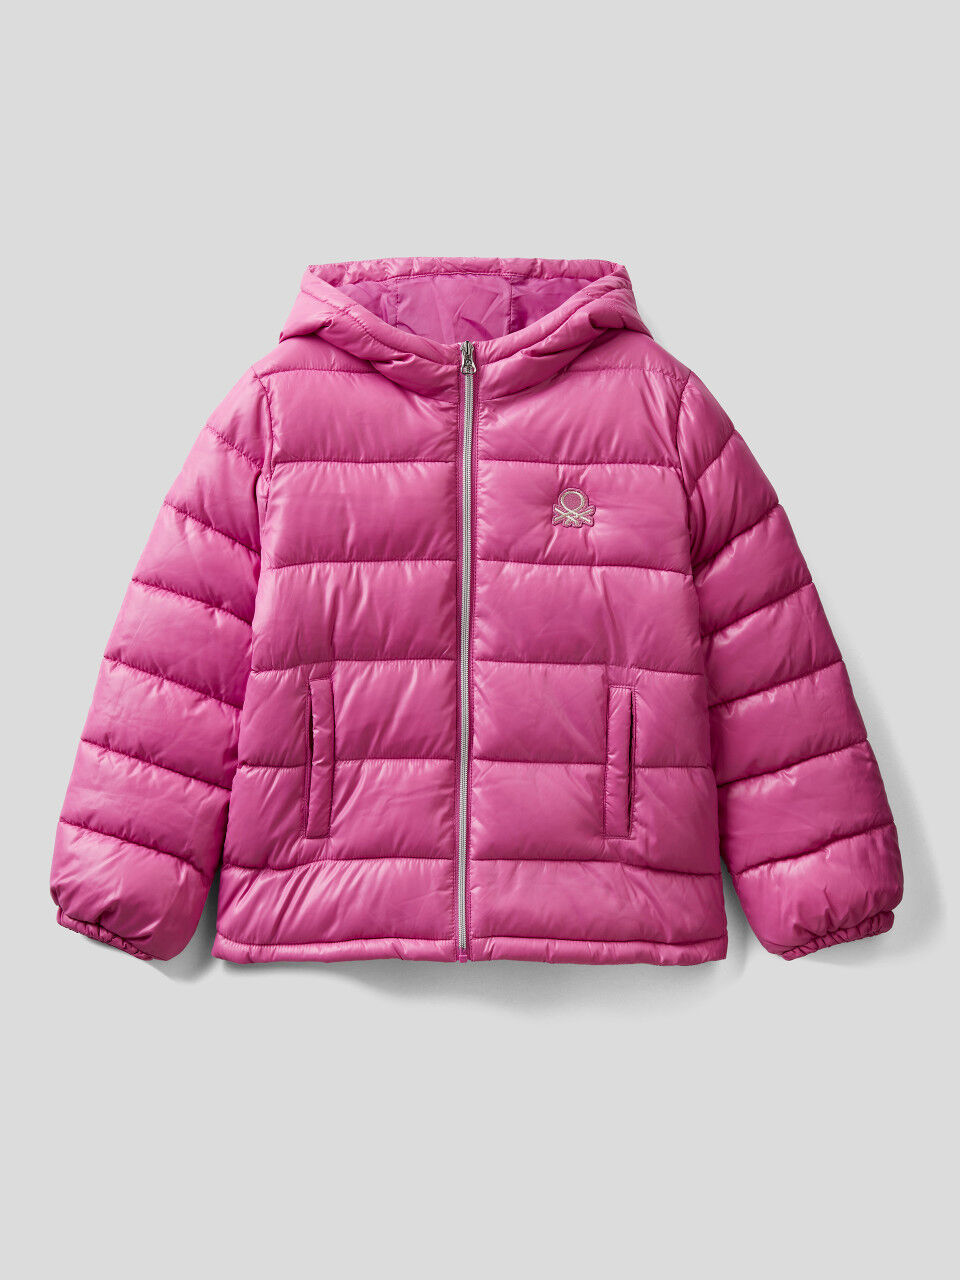 Benetton Girls United Colors  of Benetton Pink Puffer Coat age 18-24 months 